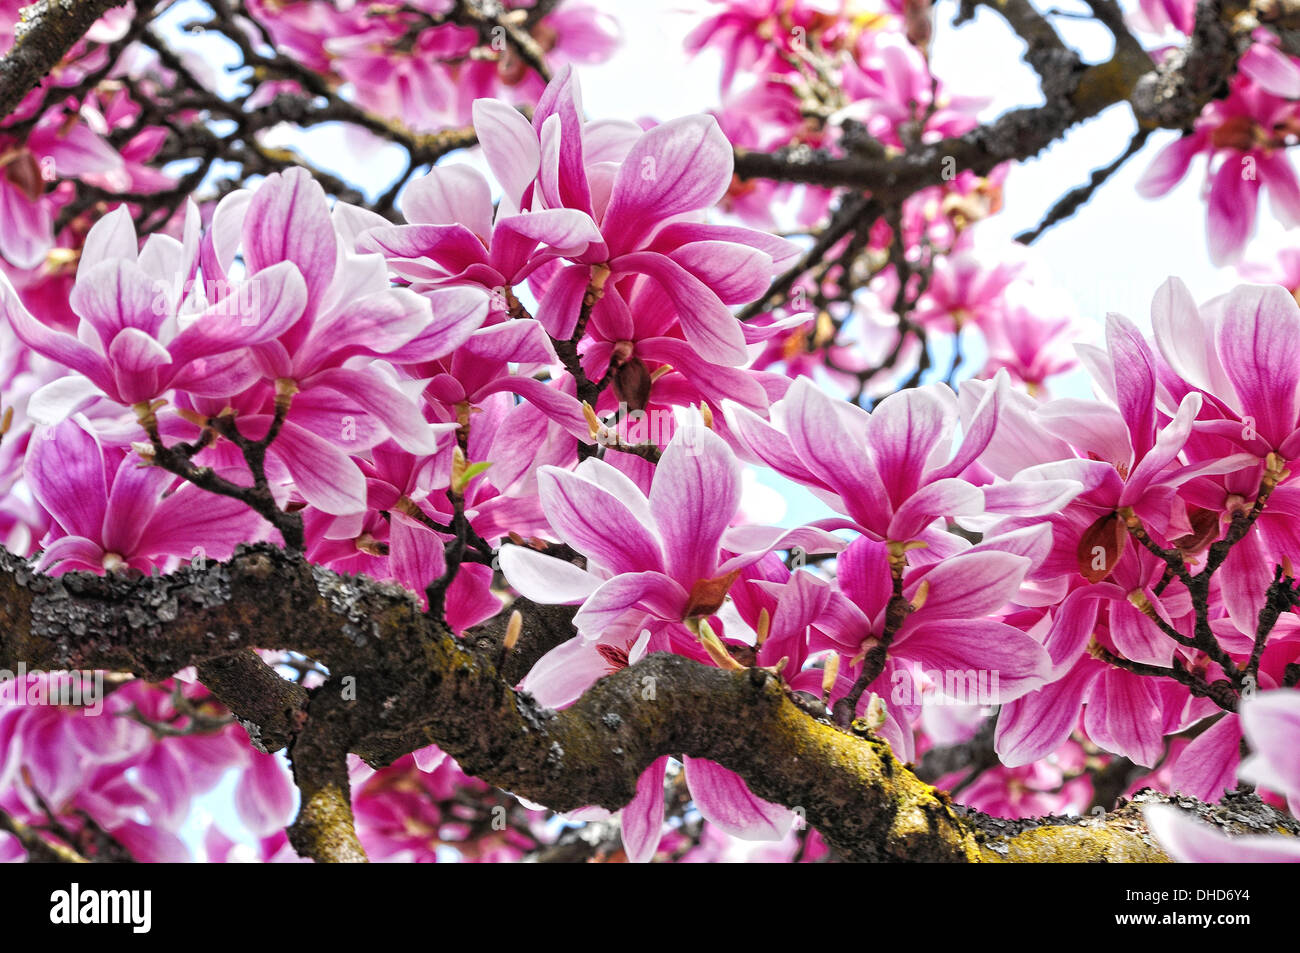 old magnolia tree with flowers Stock Photo